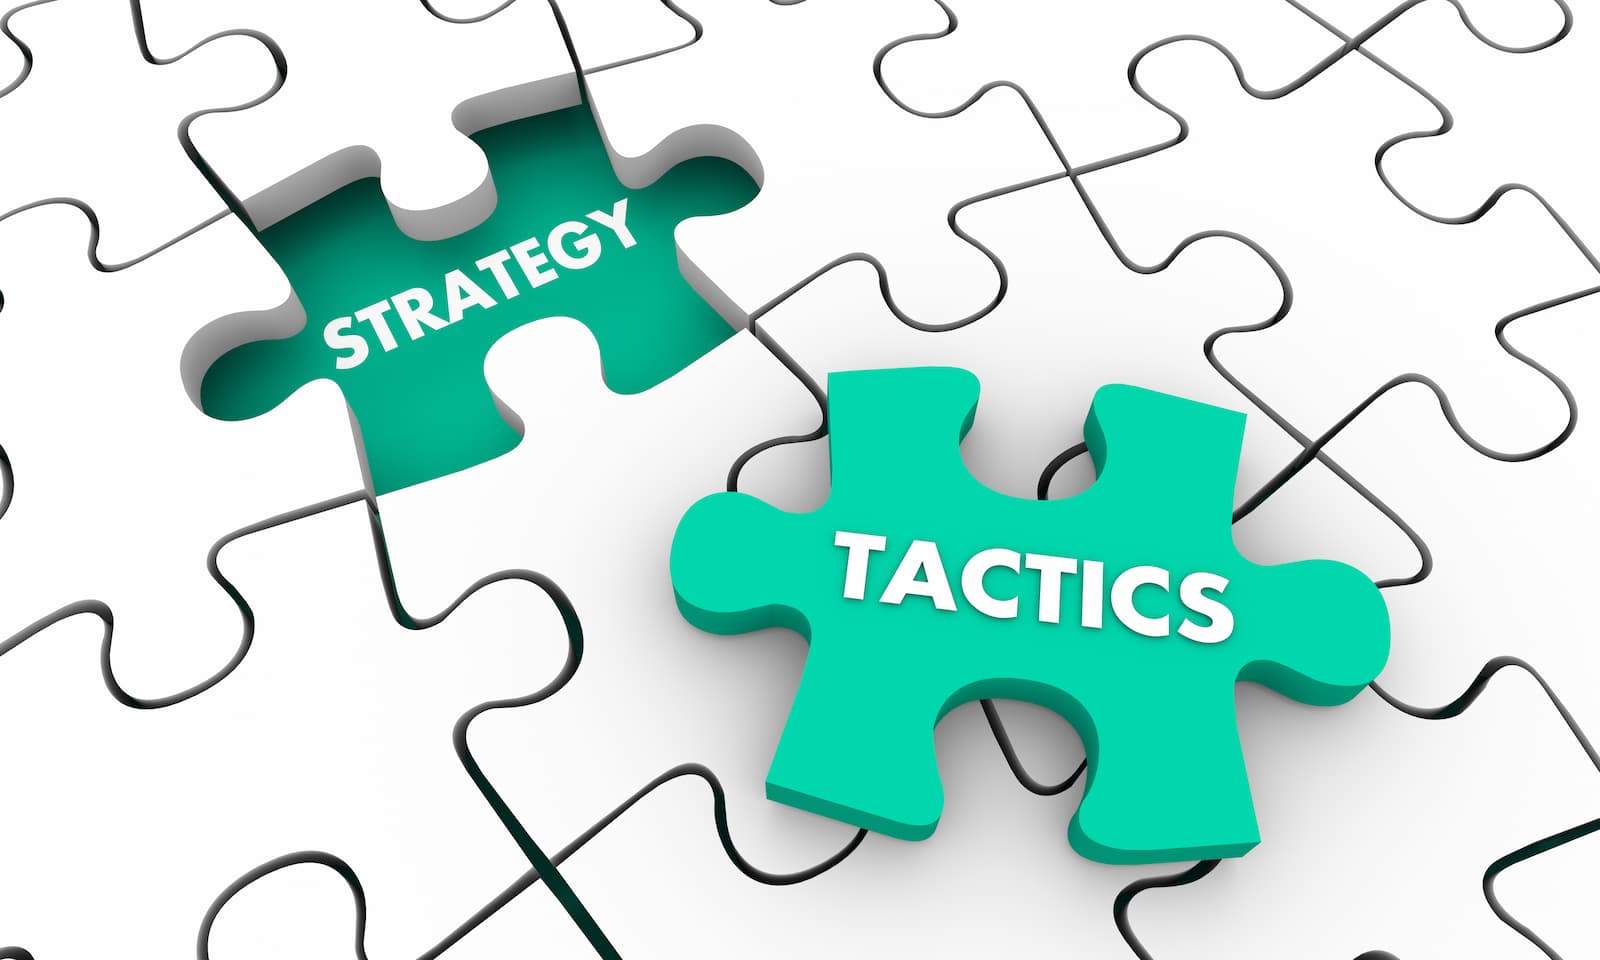 Tactic can drive strategy – you must be aware of the little things – but don’t let personal culture ruin it